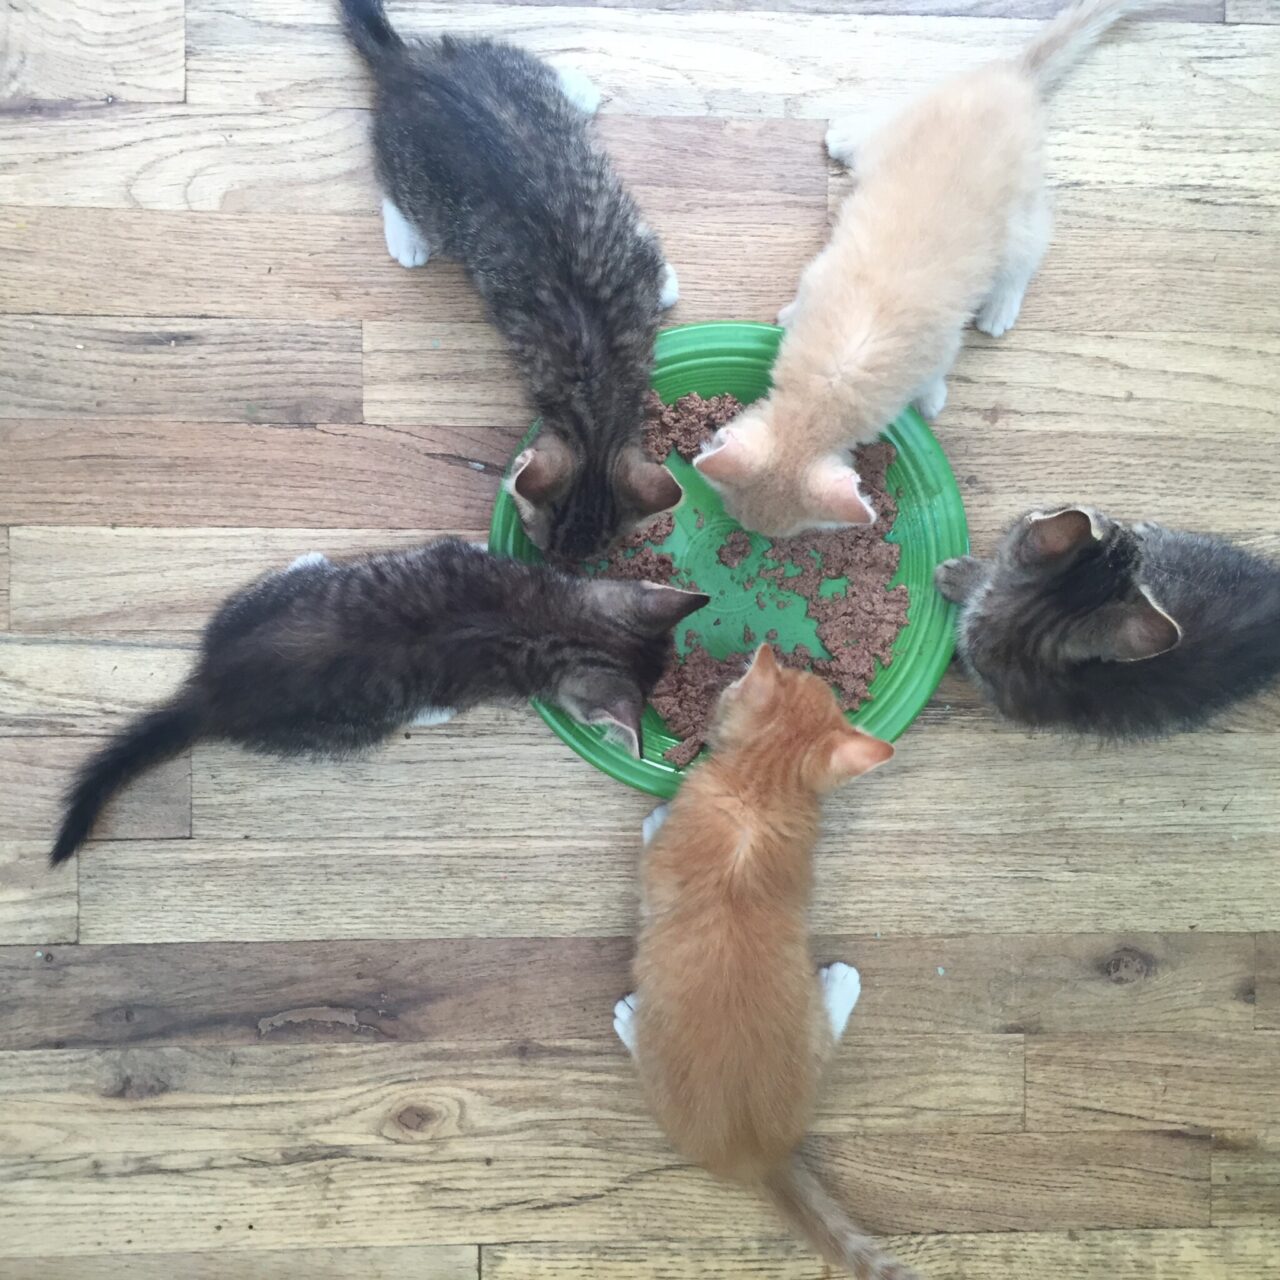 kittens eating together